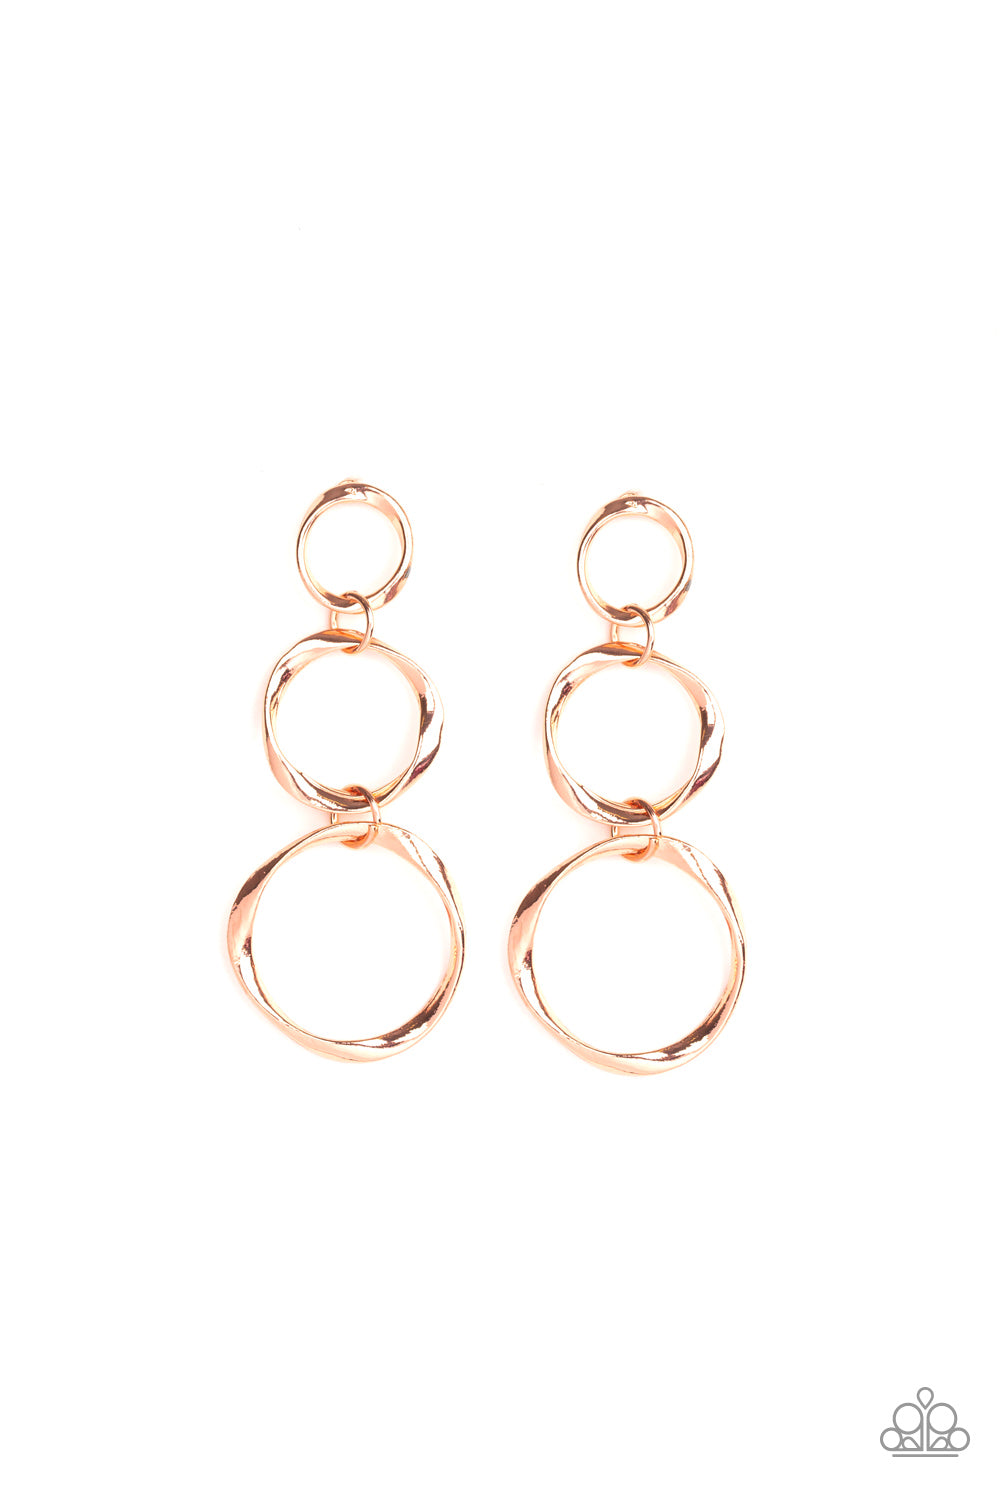 Three Ring Radiance - Copper Paparazzi Earrings